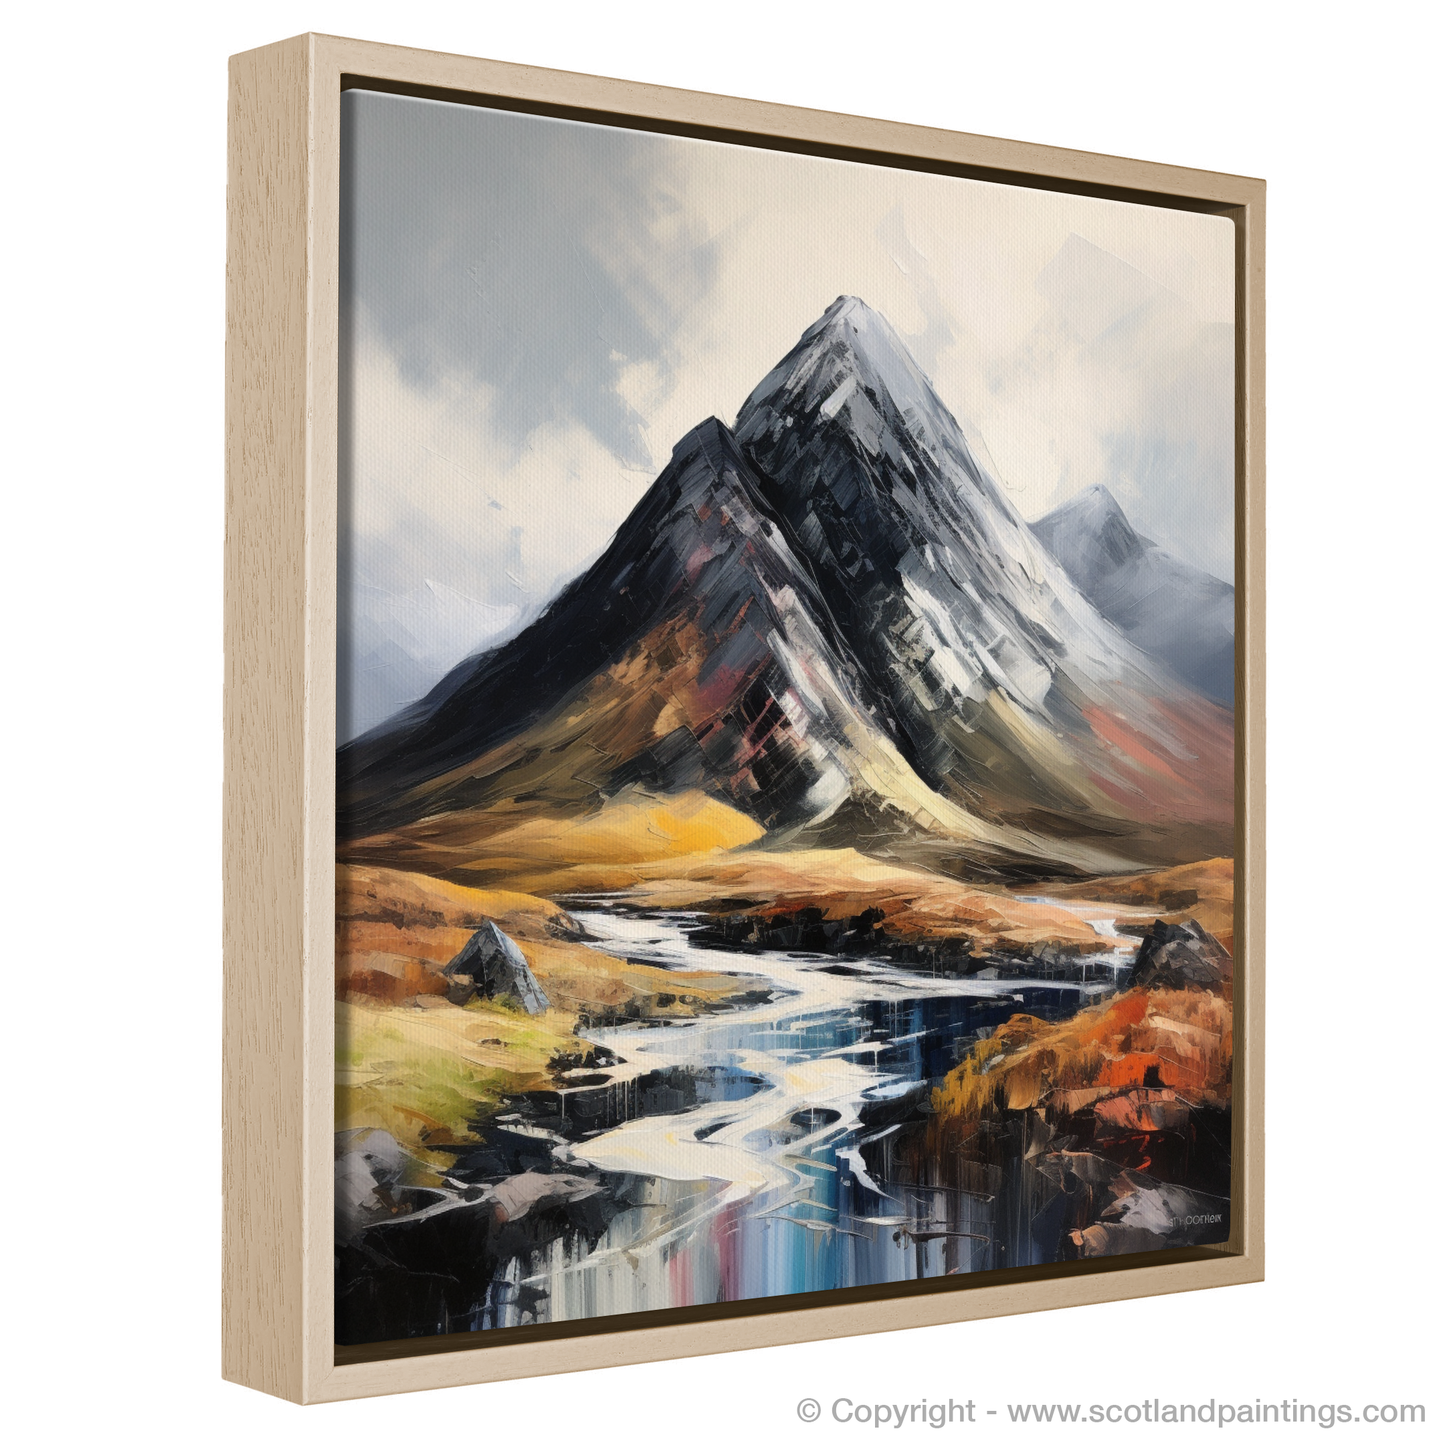 Painting and Art Print of Stob Dubh (Buachaille Etive Beag) entitled "Majestic Stob Dubh: An Expressionist Journey Through the Scottish Highlands".